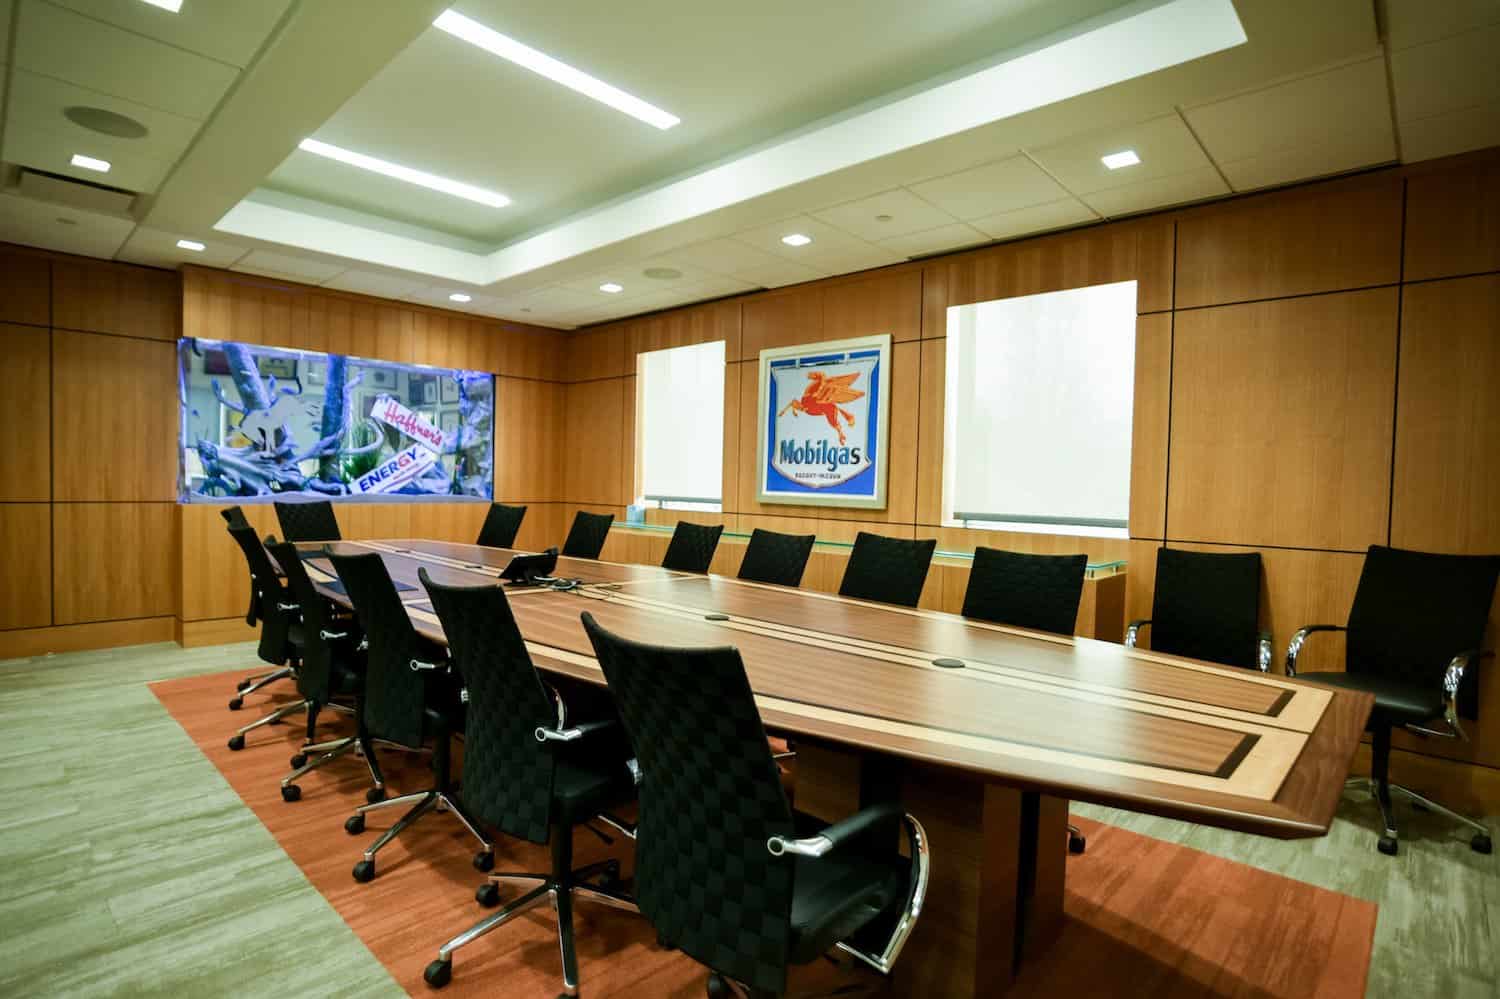 9 Conference Room Design Ideas & Trends for 2023